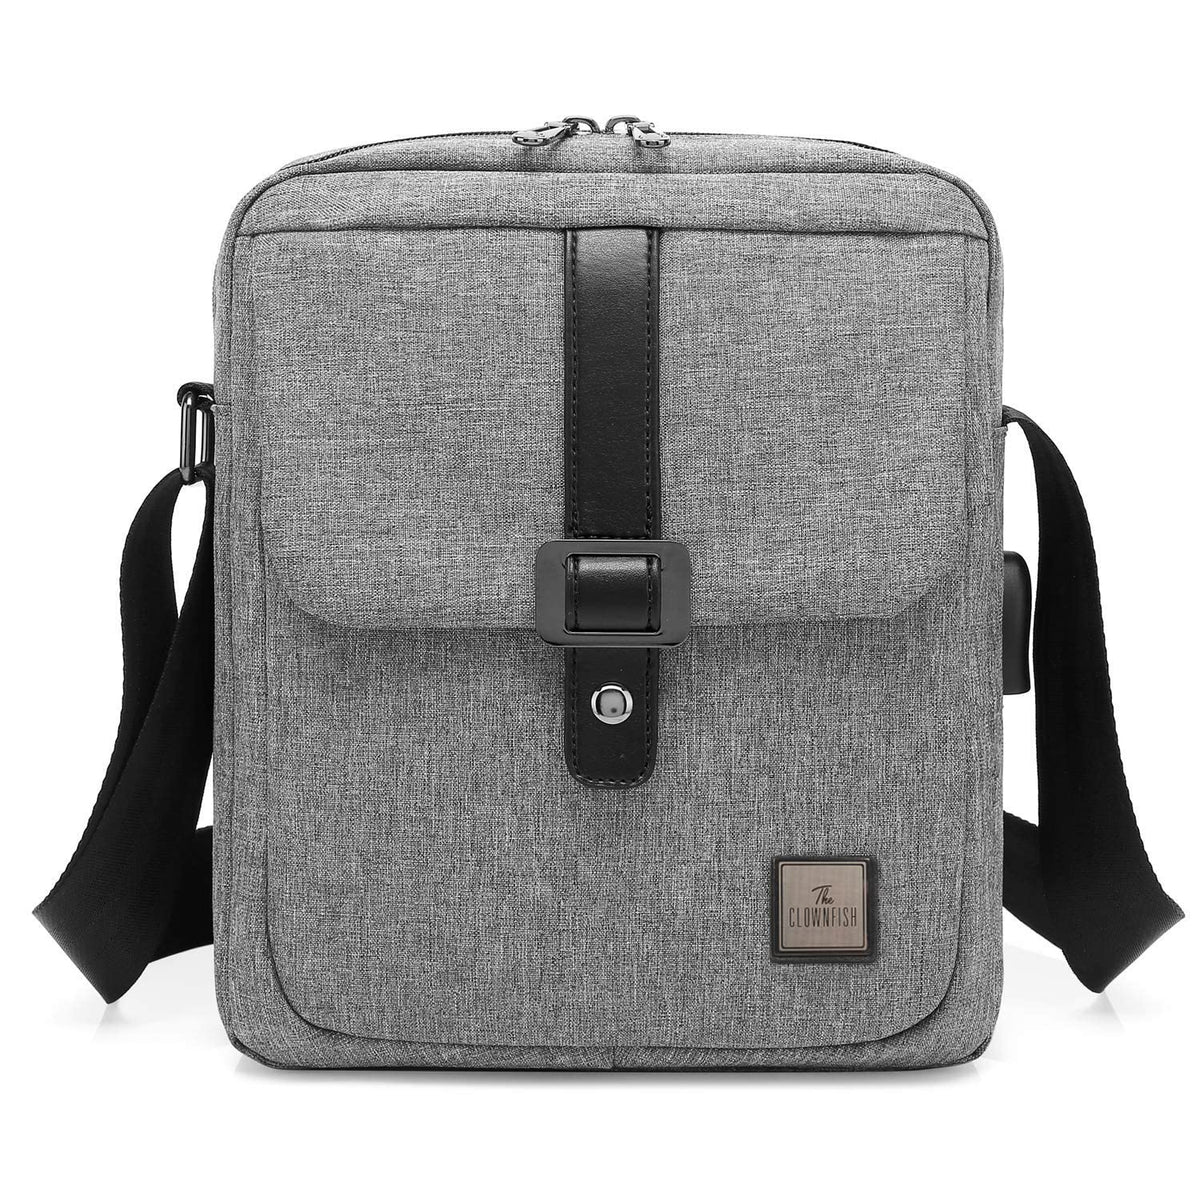 THE CLOWNFISH Single Shoulder Unisex Water Resistant Polyester 10.6 inch Tablet Bag Sling Bag with External USB Interface (Grey)